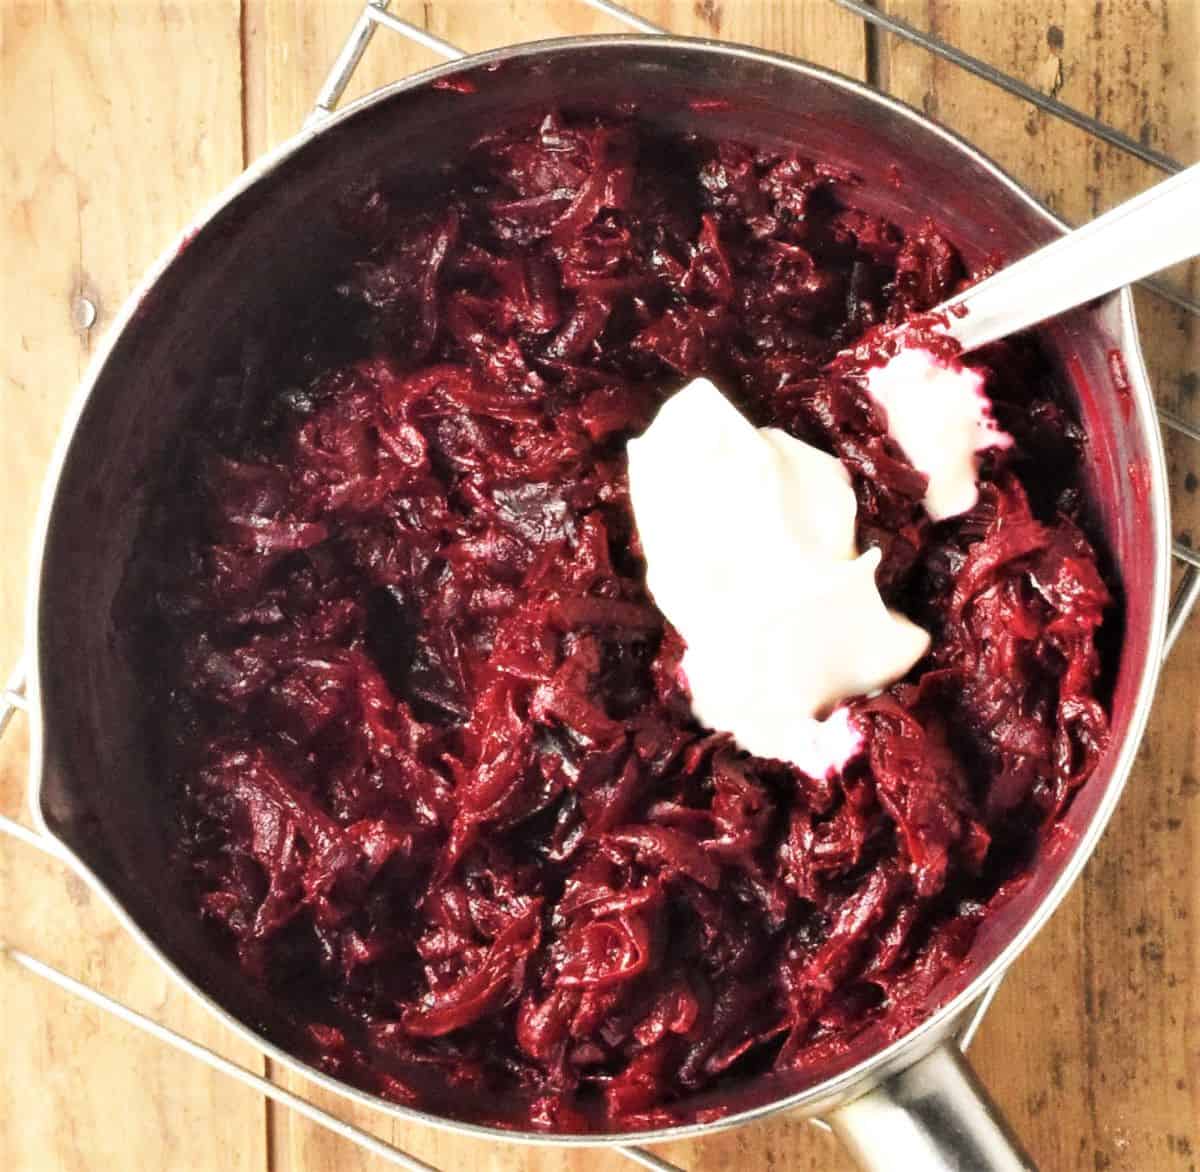 Shredded beetroot with dollop of sour cream and spoon in pan.